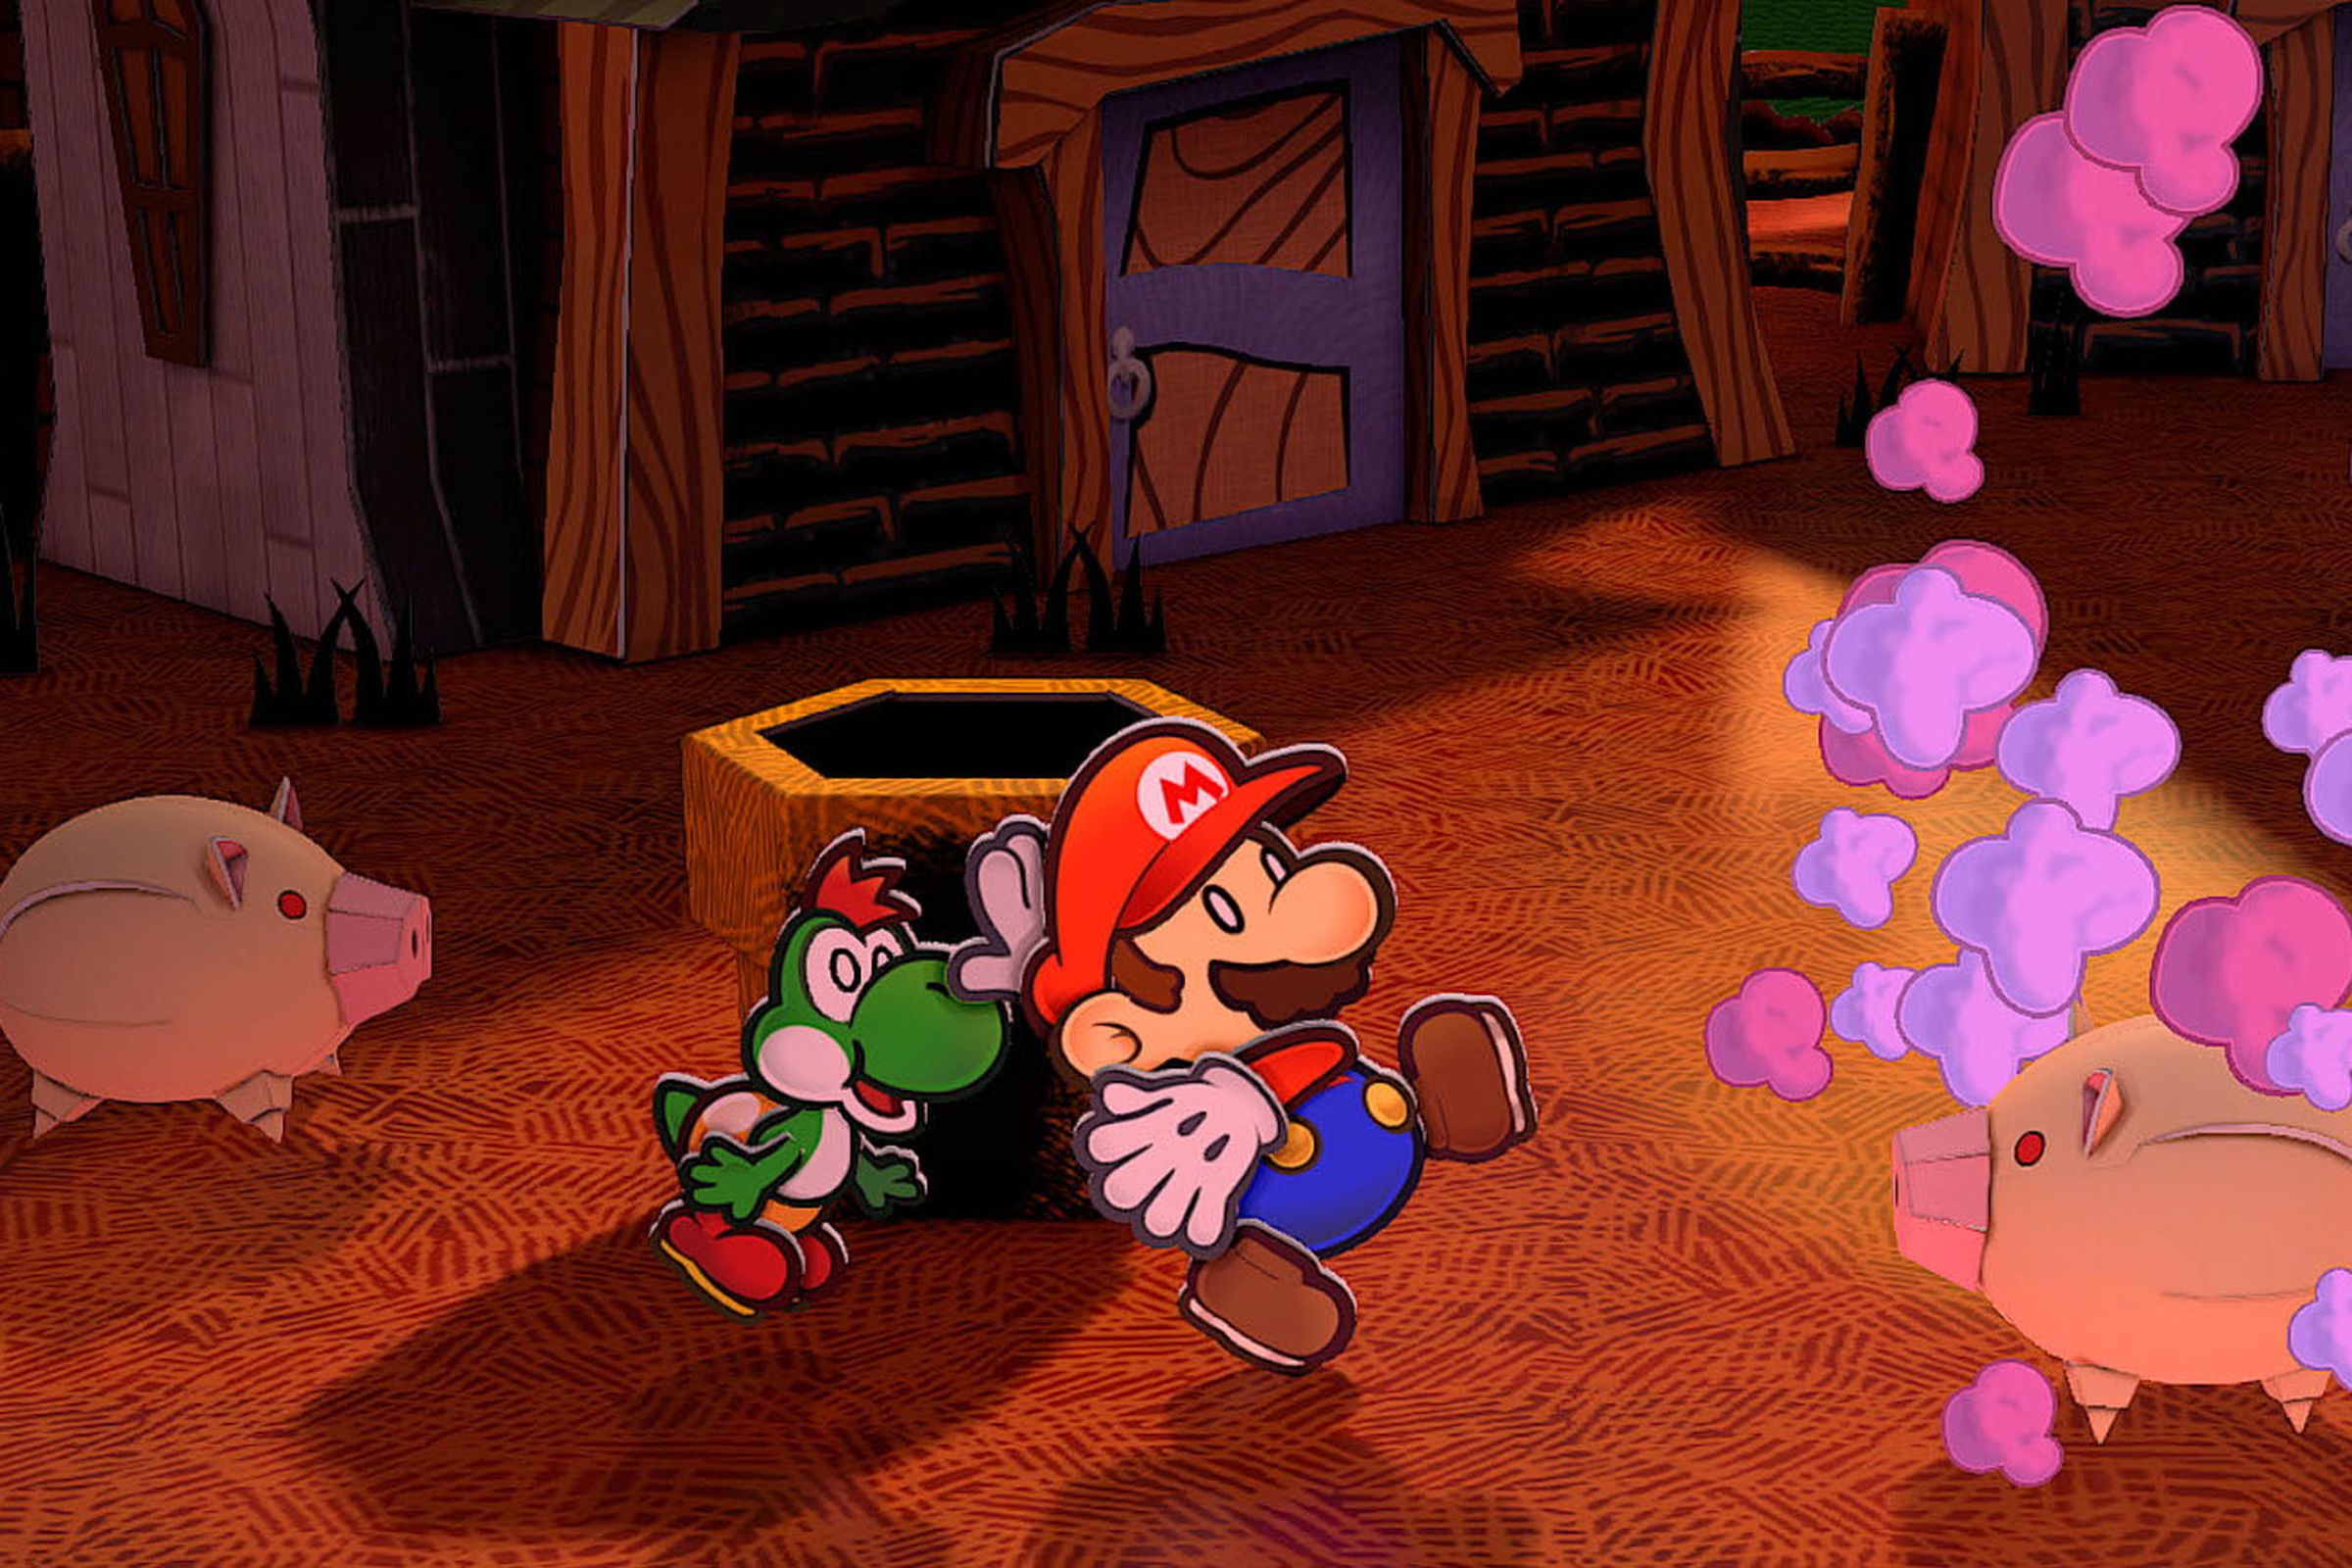 A screenshot from Paper Mario: The Thousand-Year Door.